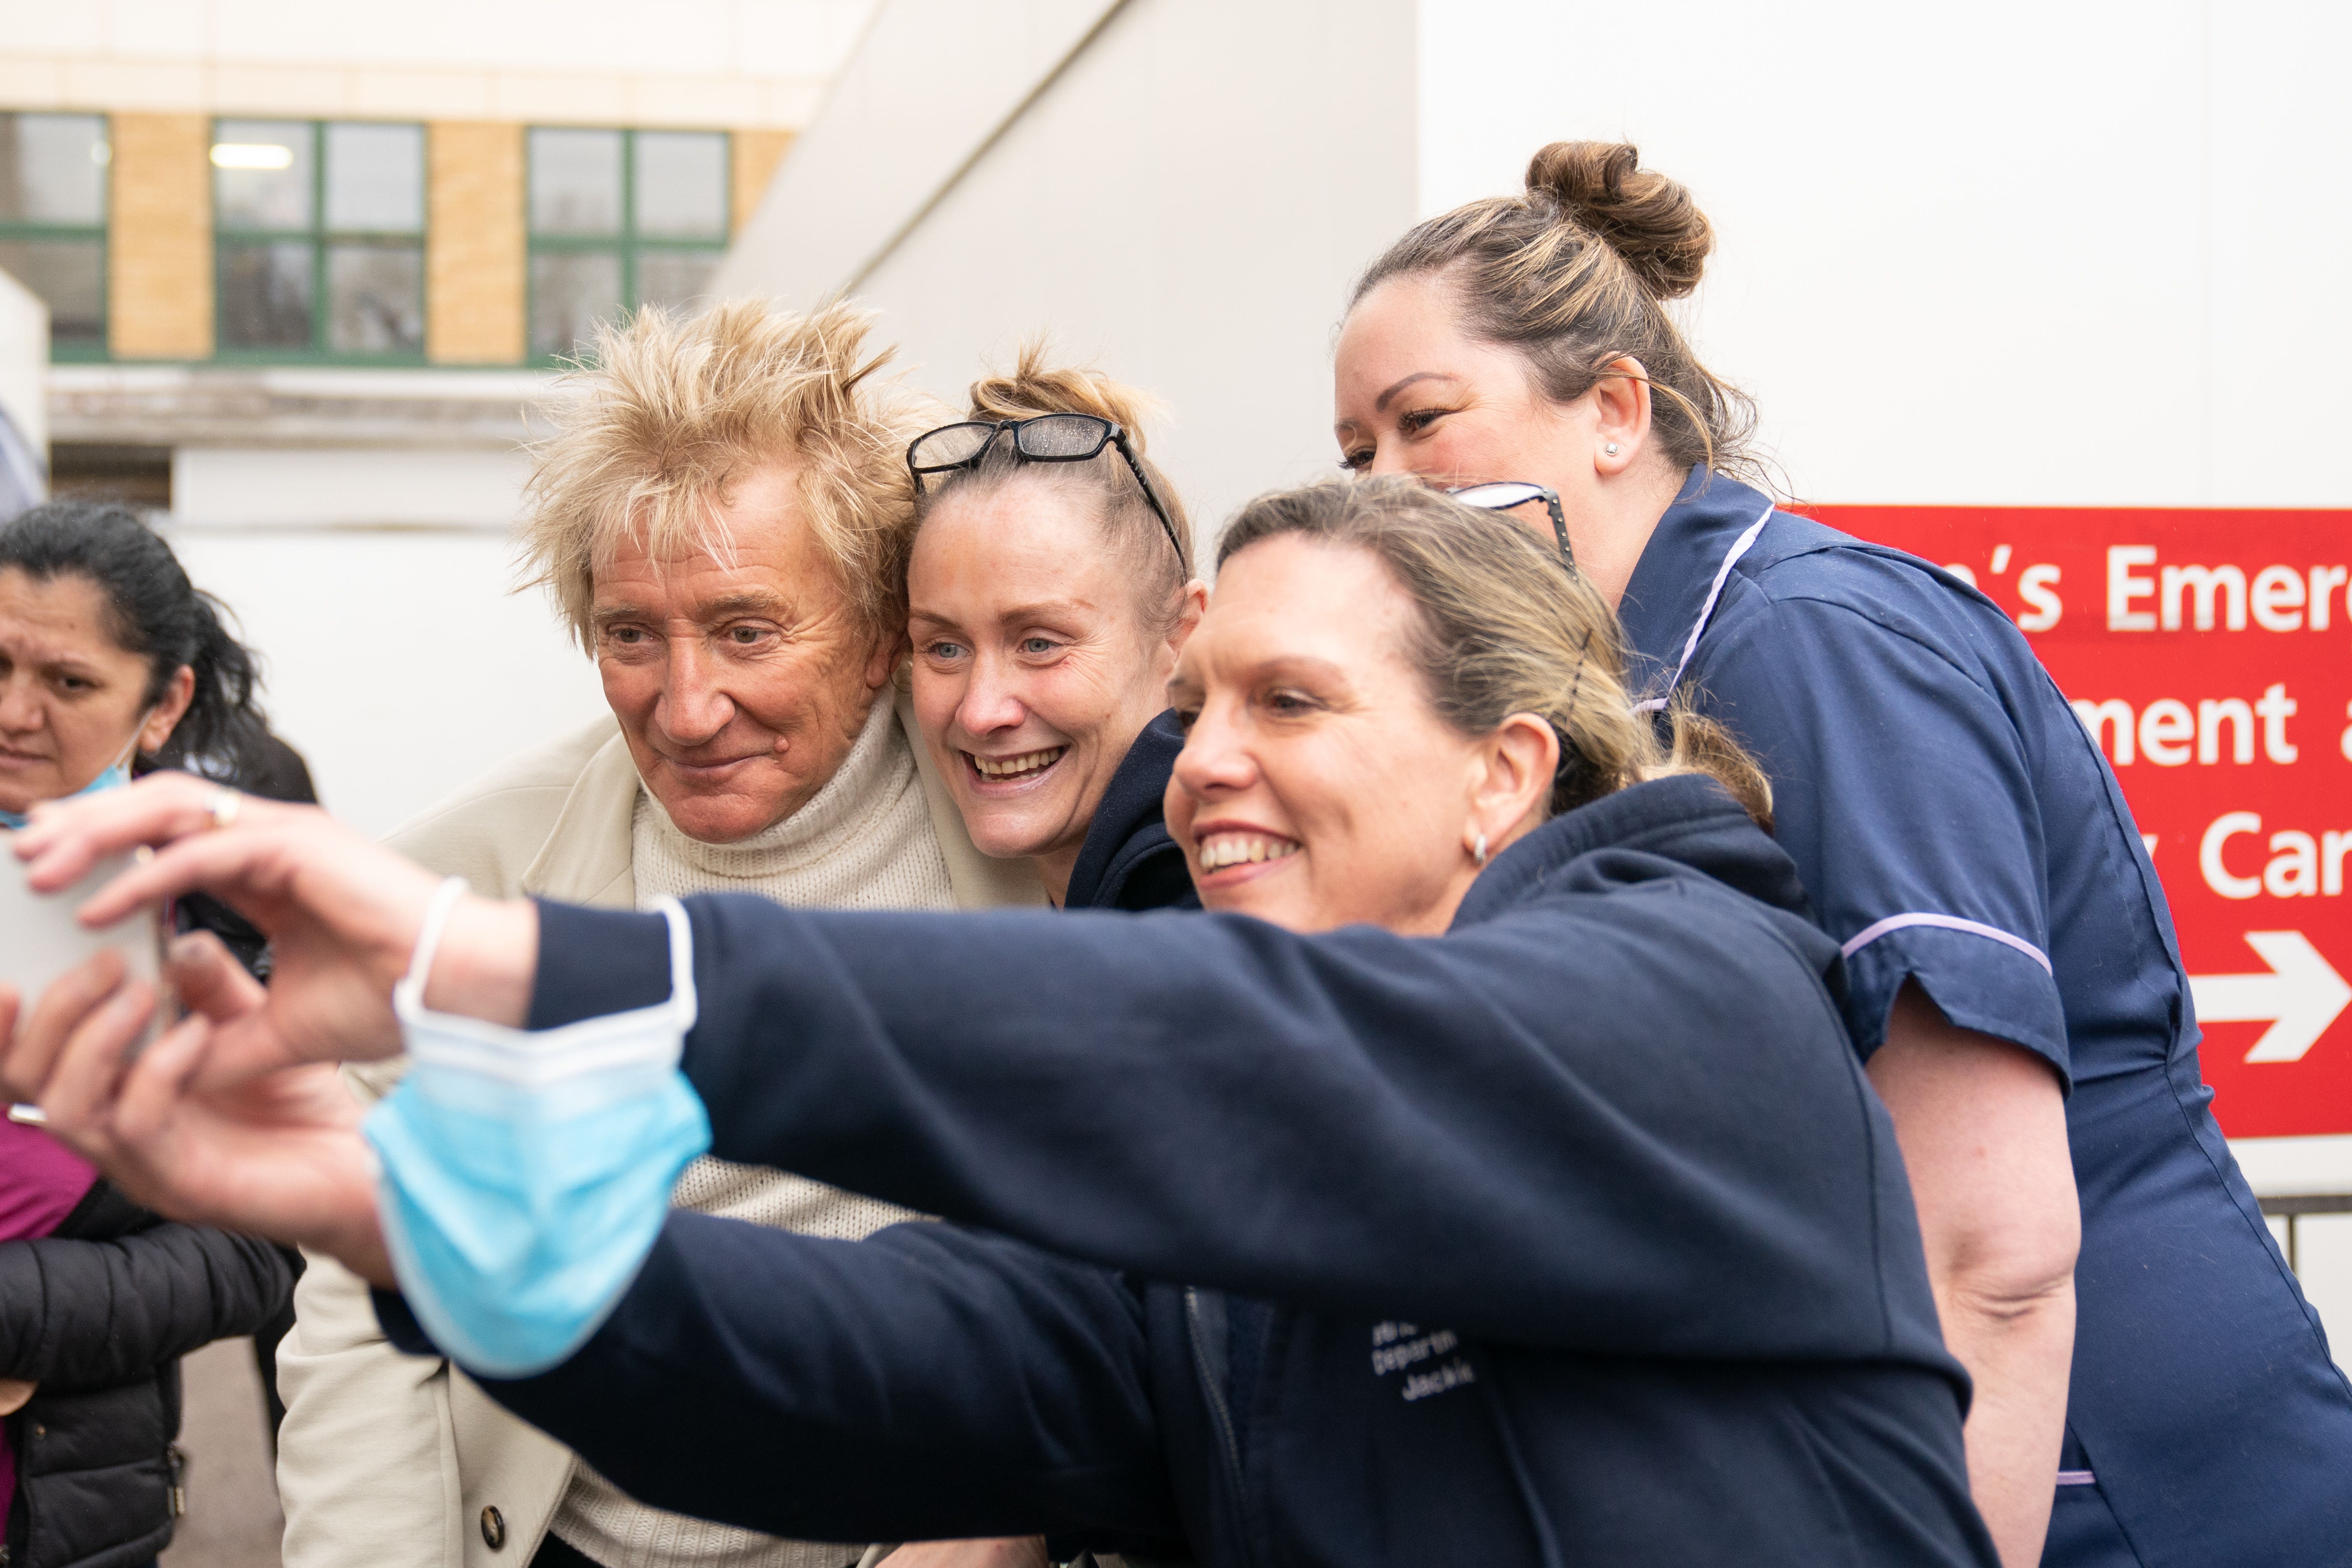 Sir Rod Stewart visits NHS hospital where he paid for patients' scans The Independent